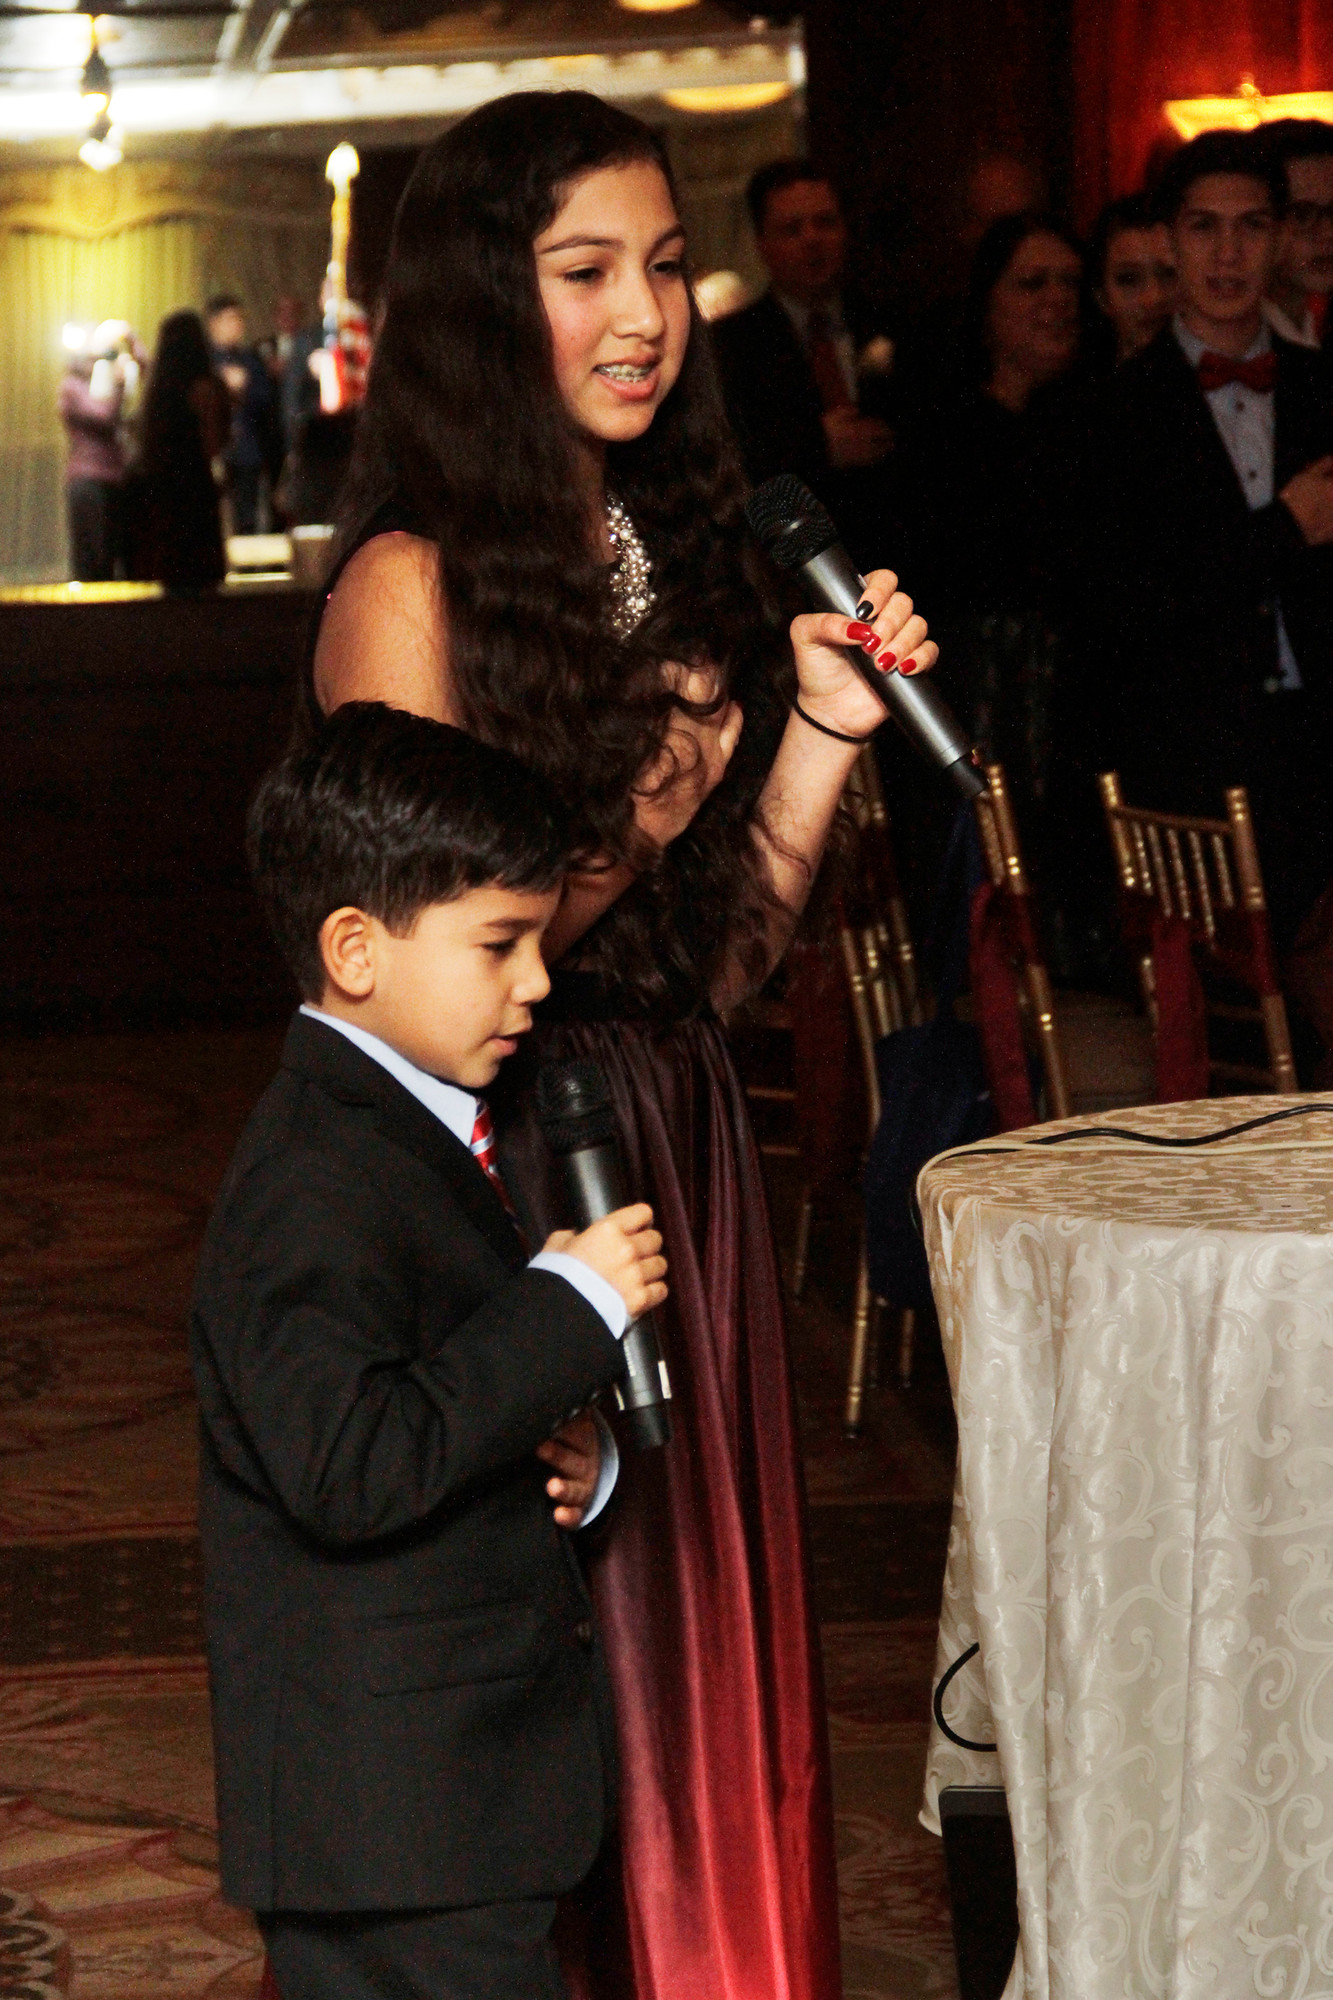 Oliver and Madison Miranda, the new president’s children, led the guests in the Pledge of Allegiance.